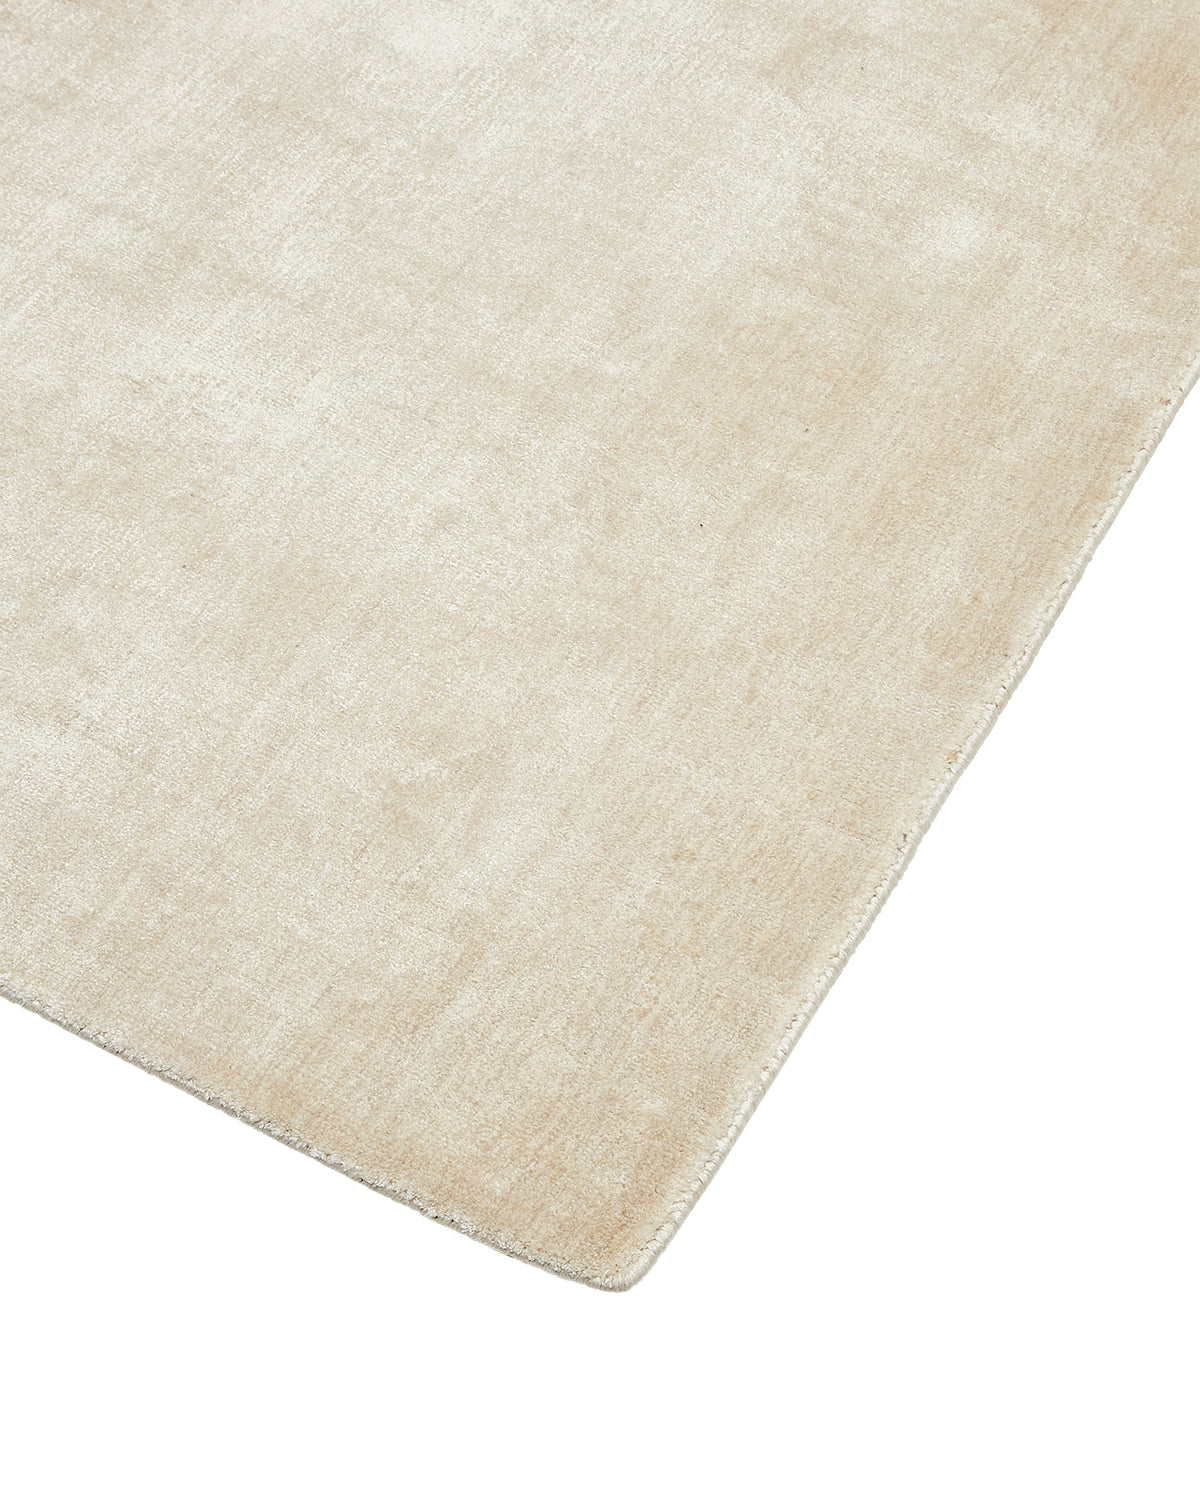 Lodhi Hand Loomed Contemporary Solid Area Rug